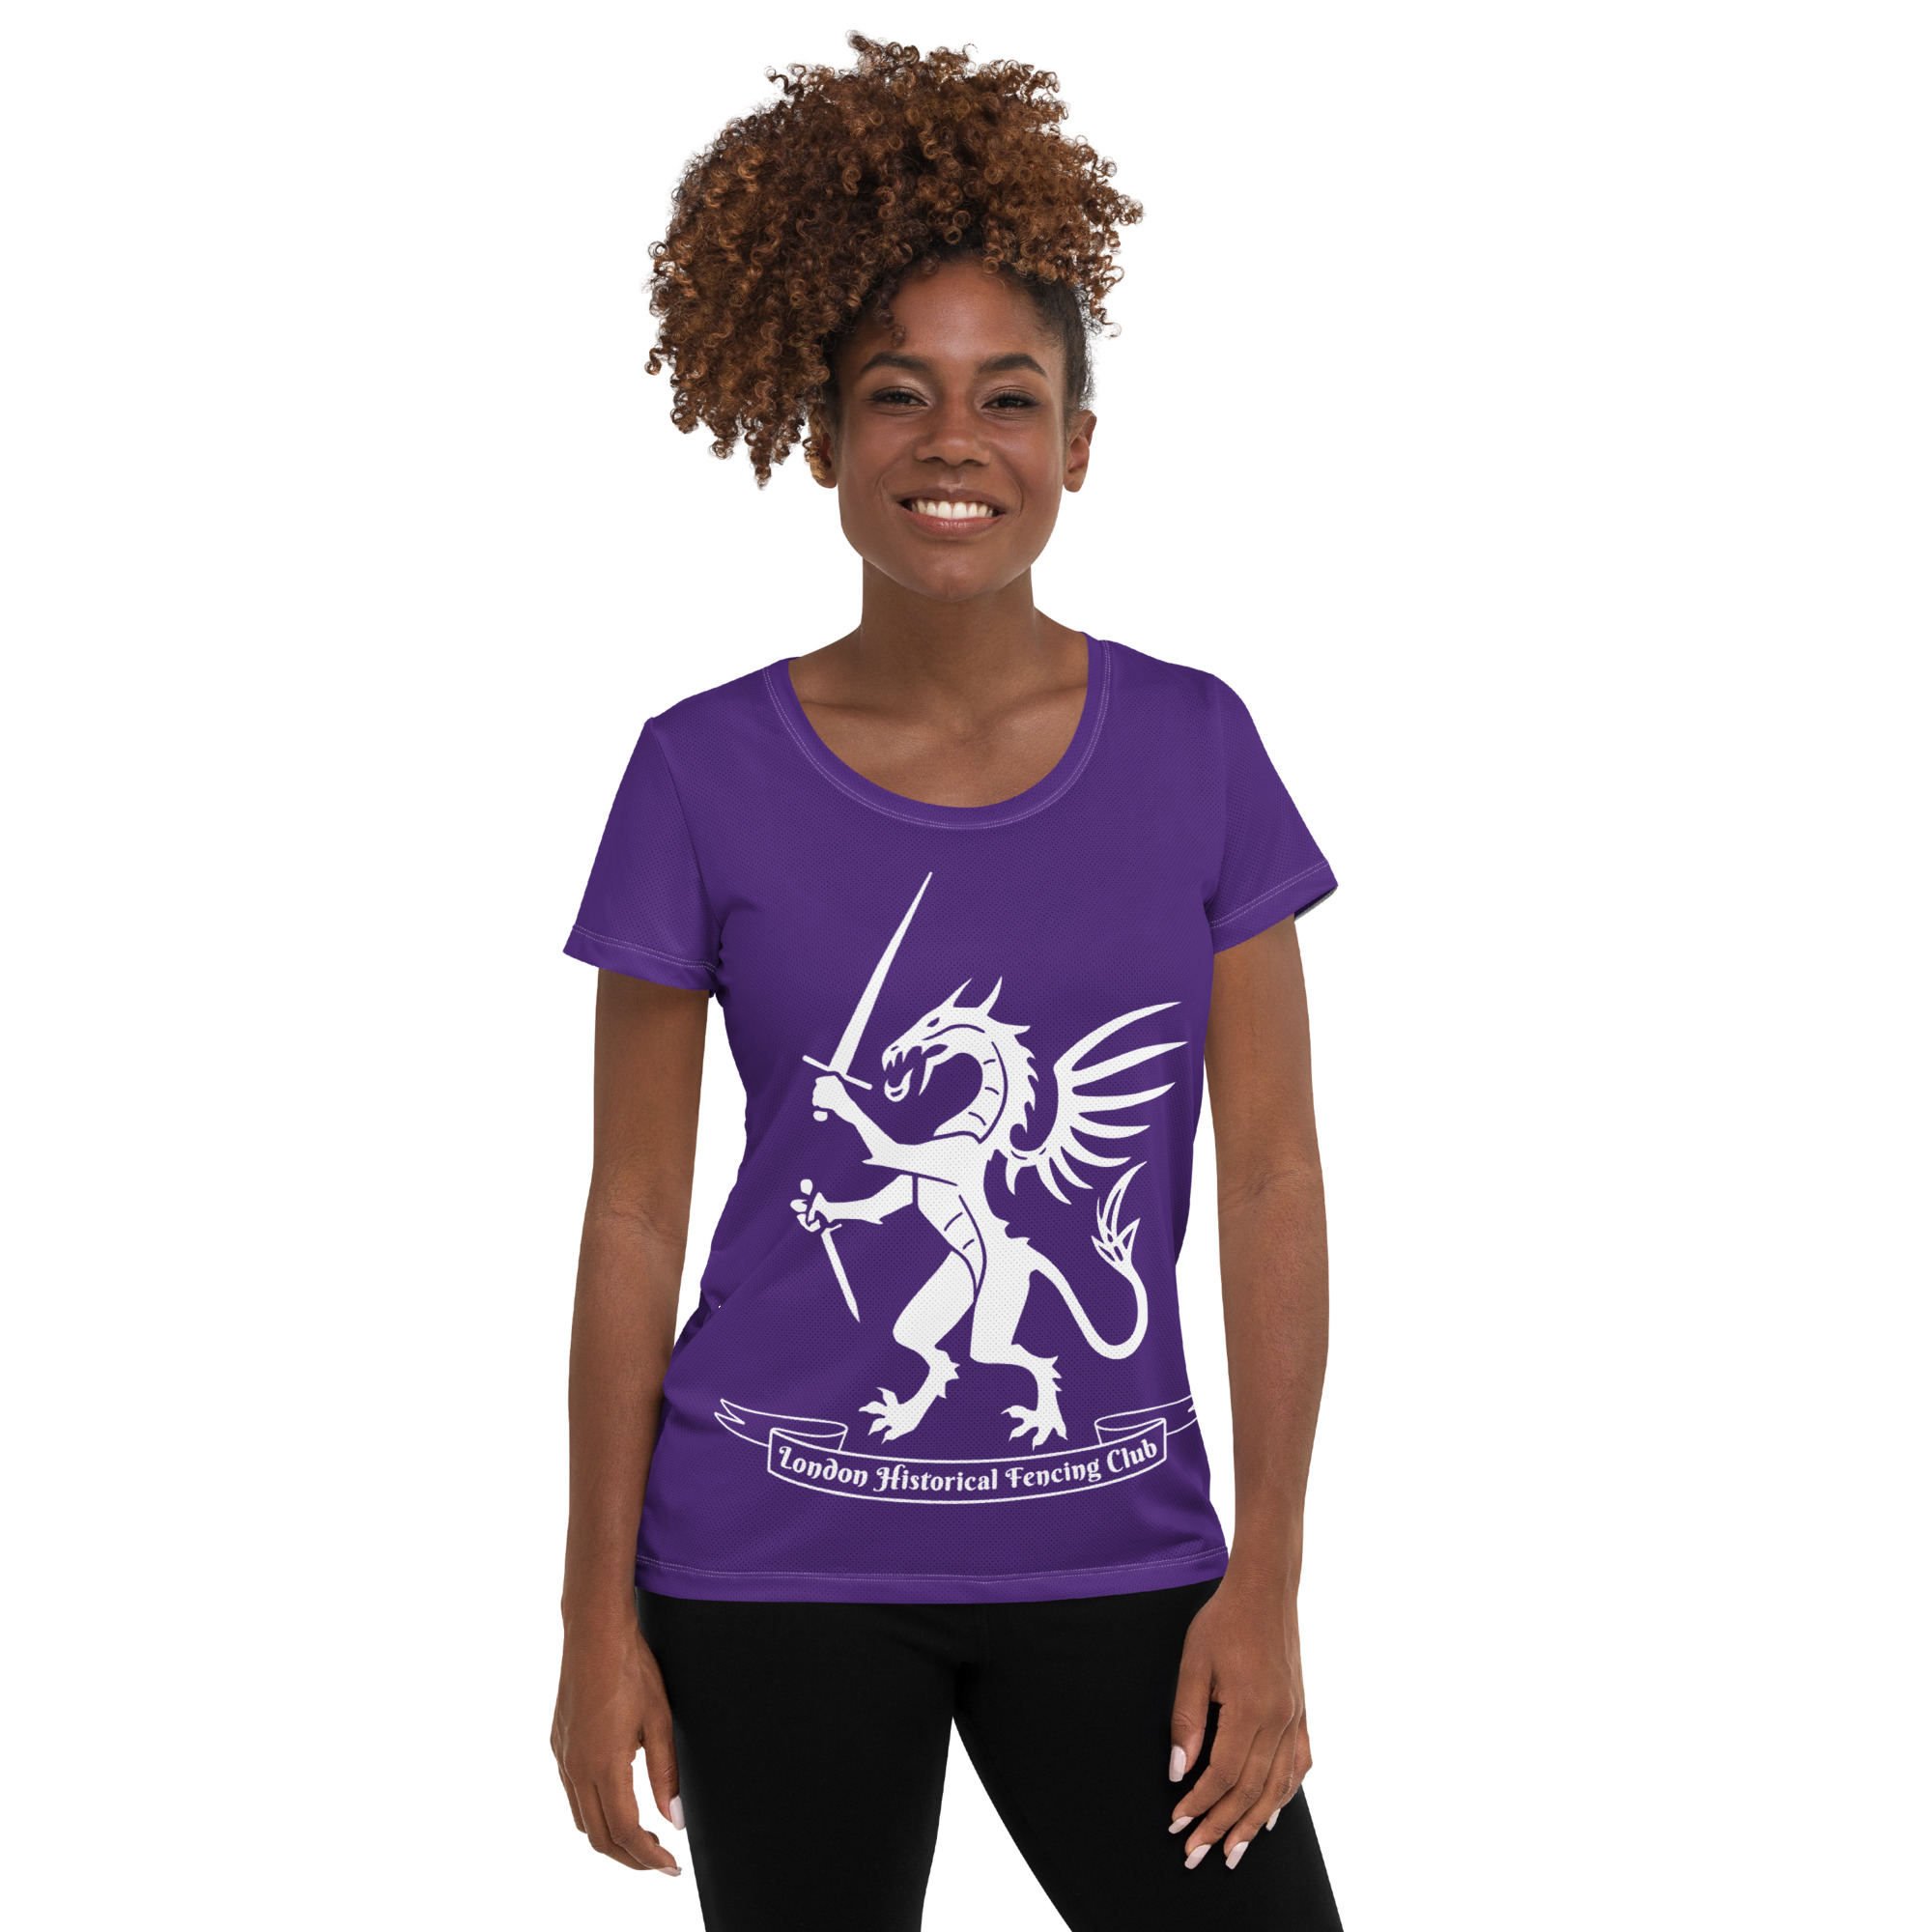 all-over-print-womens-athletic-t-shirt-white-front-65ae49fbabfc8.jpg